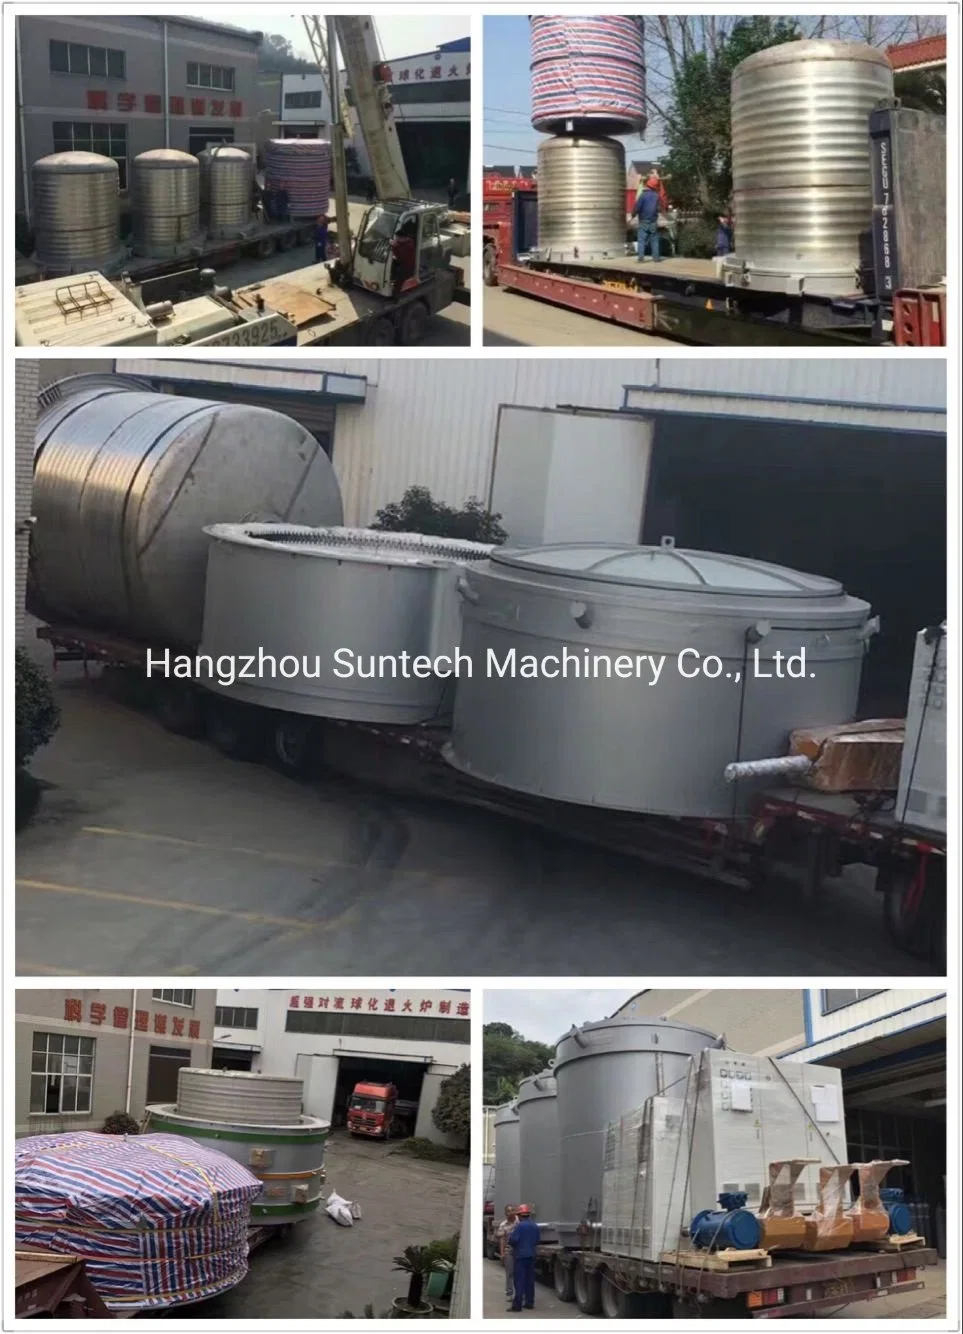 Trolley Type High Vacuum Annealing Furnace for Transformer Cores/Welding Wire Rods/Copper Wires